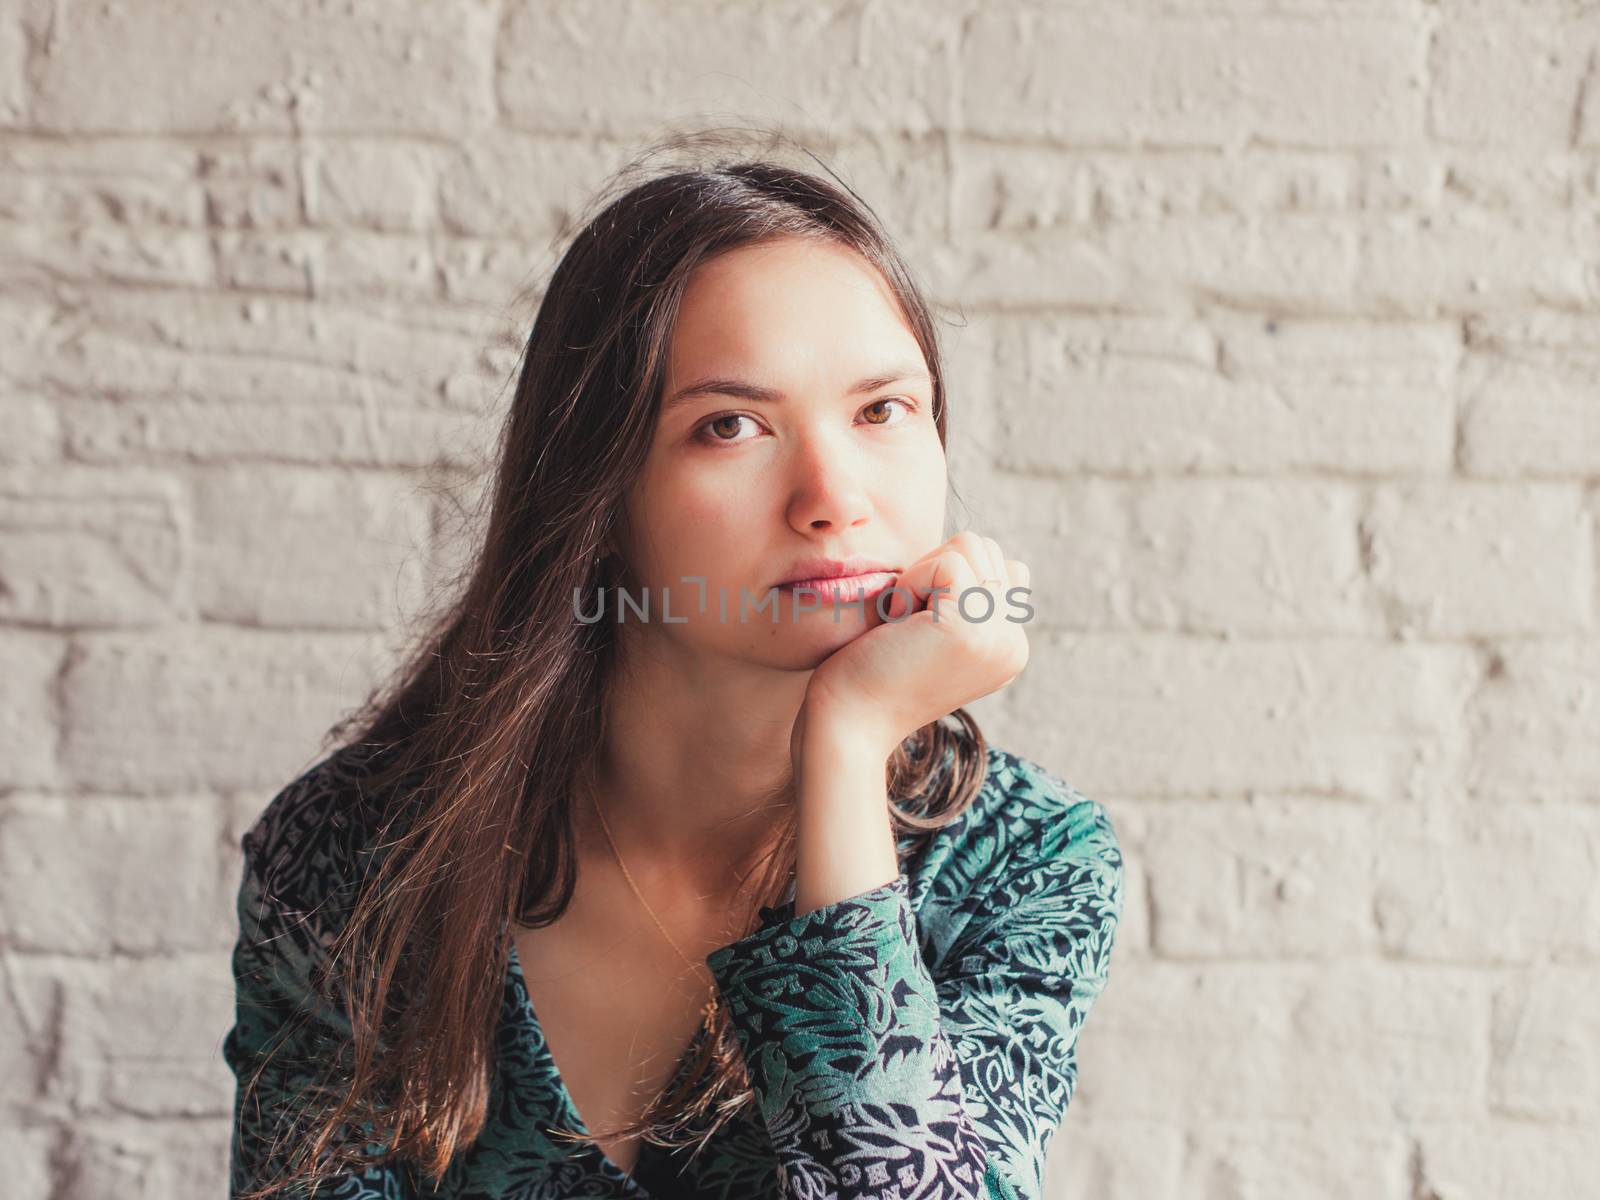 Stern and serious looking young brunette beauty. Closeup portrait of serious young woman with sensual look at camera. Girl rests her chin on hand and serious looking at camera.